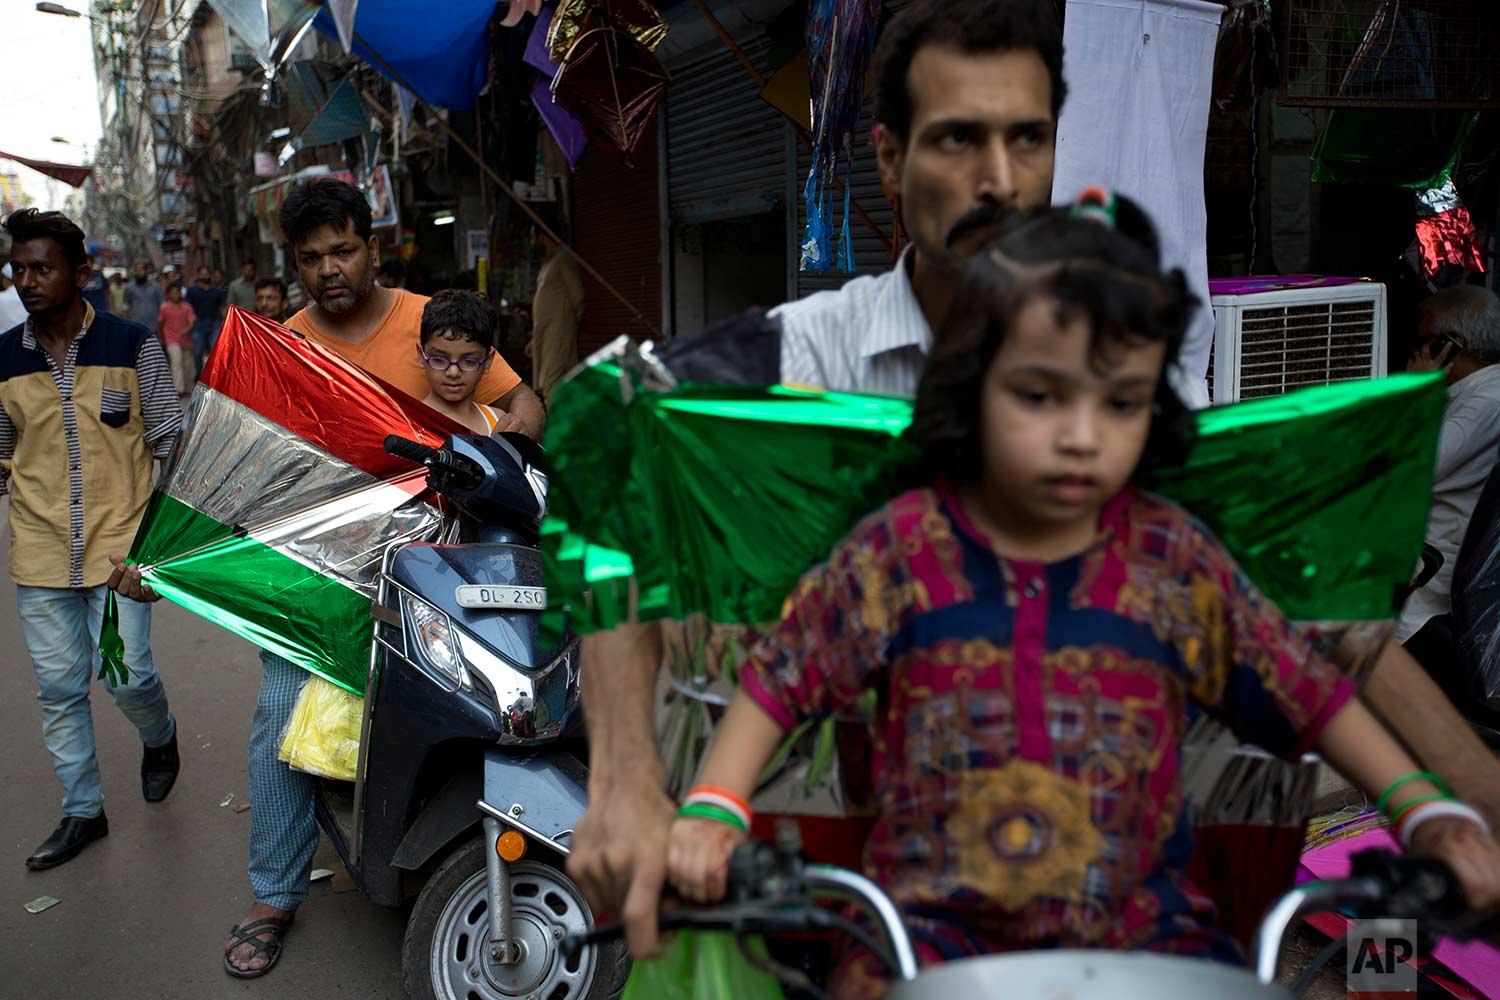  In this Tuesday, Aug. 15, 2017 photo, Indians ride motorbikes carrying kites to fly on Independence Day in the old quarters of New Delhi, India. (AP Photo/Tsering Topgyal) 